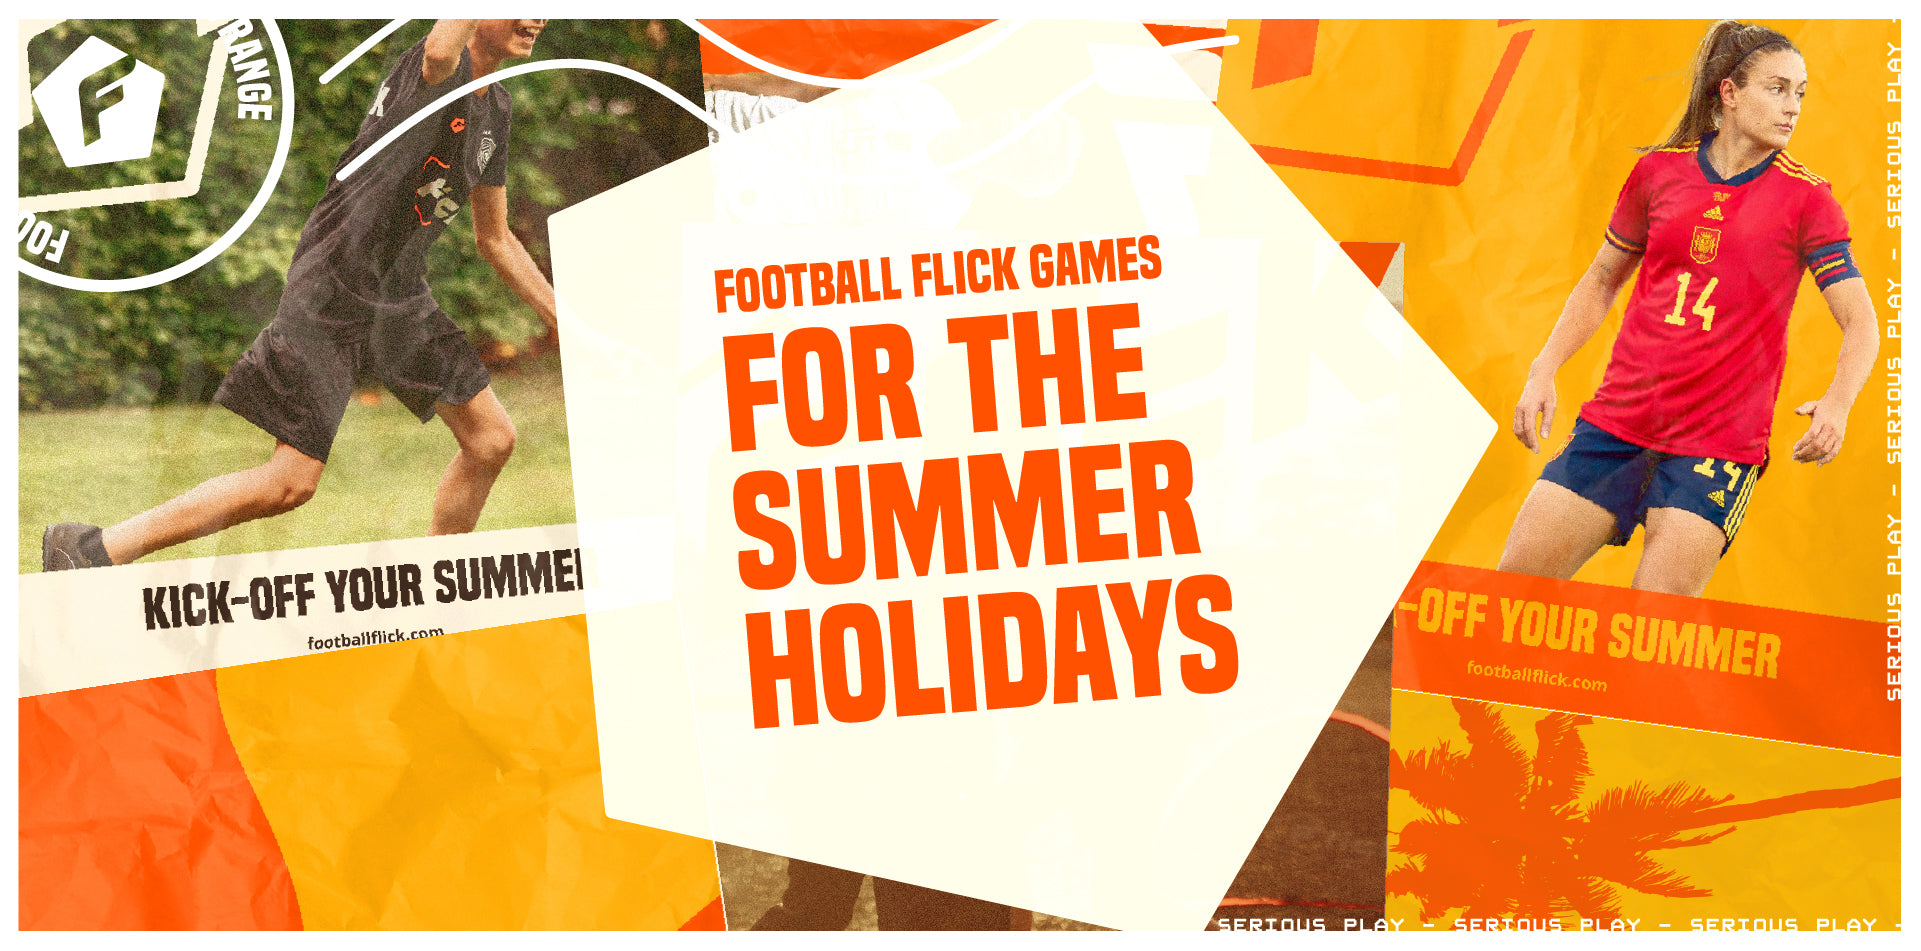 The Best Football Games For The Summer Holidays